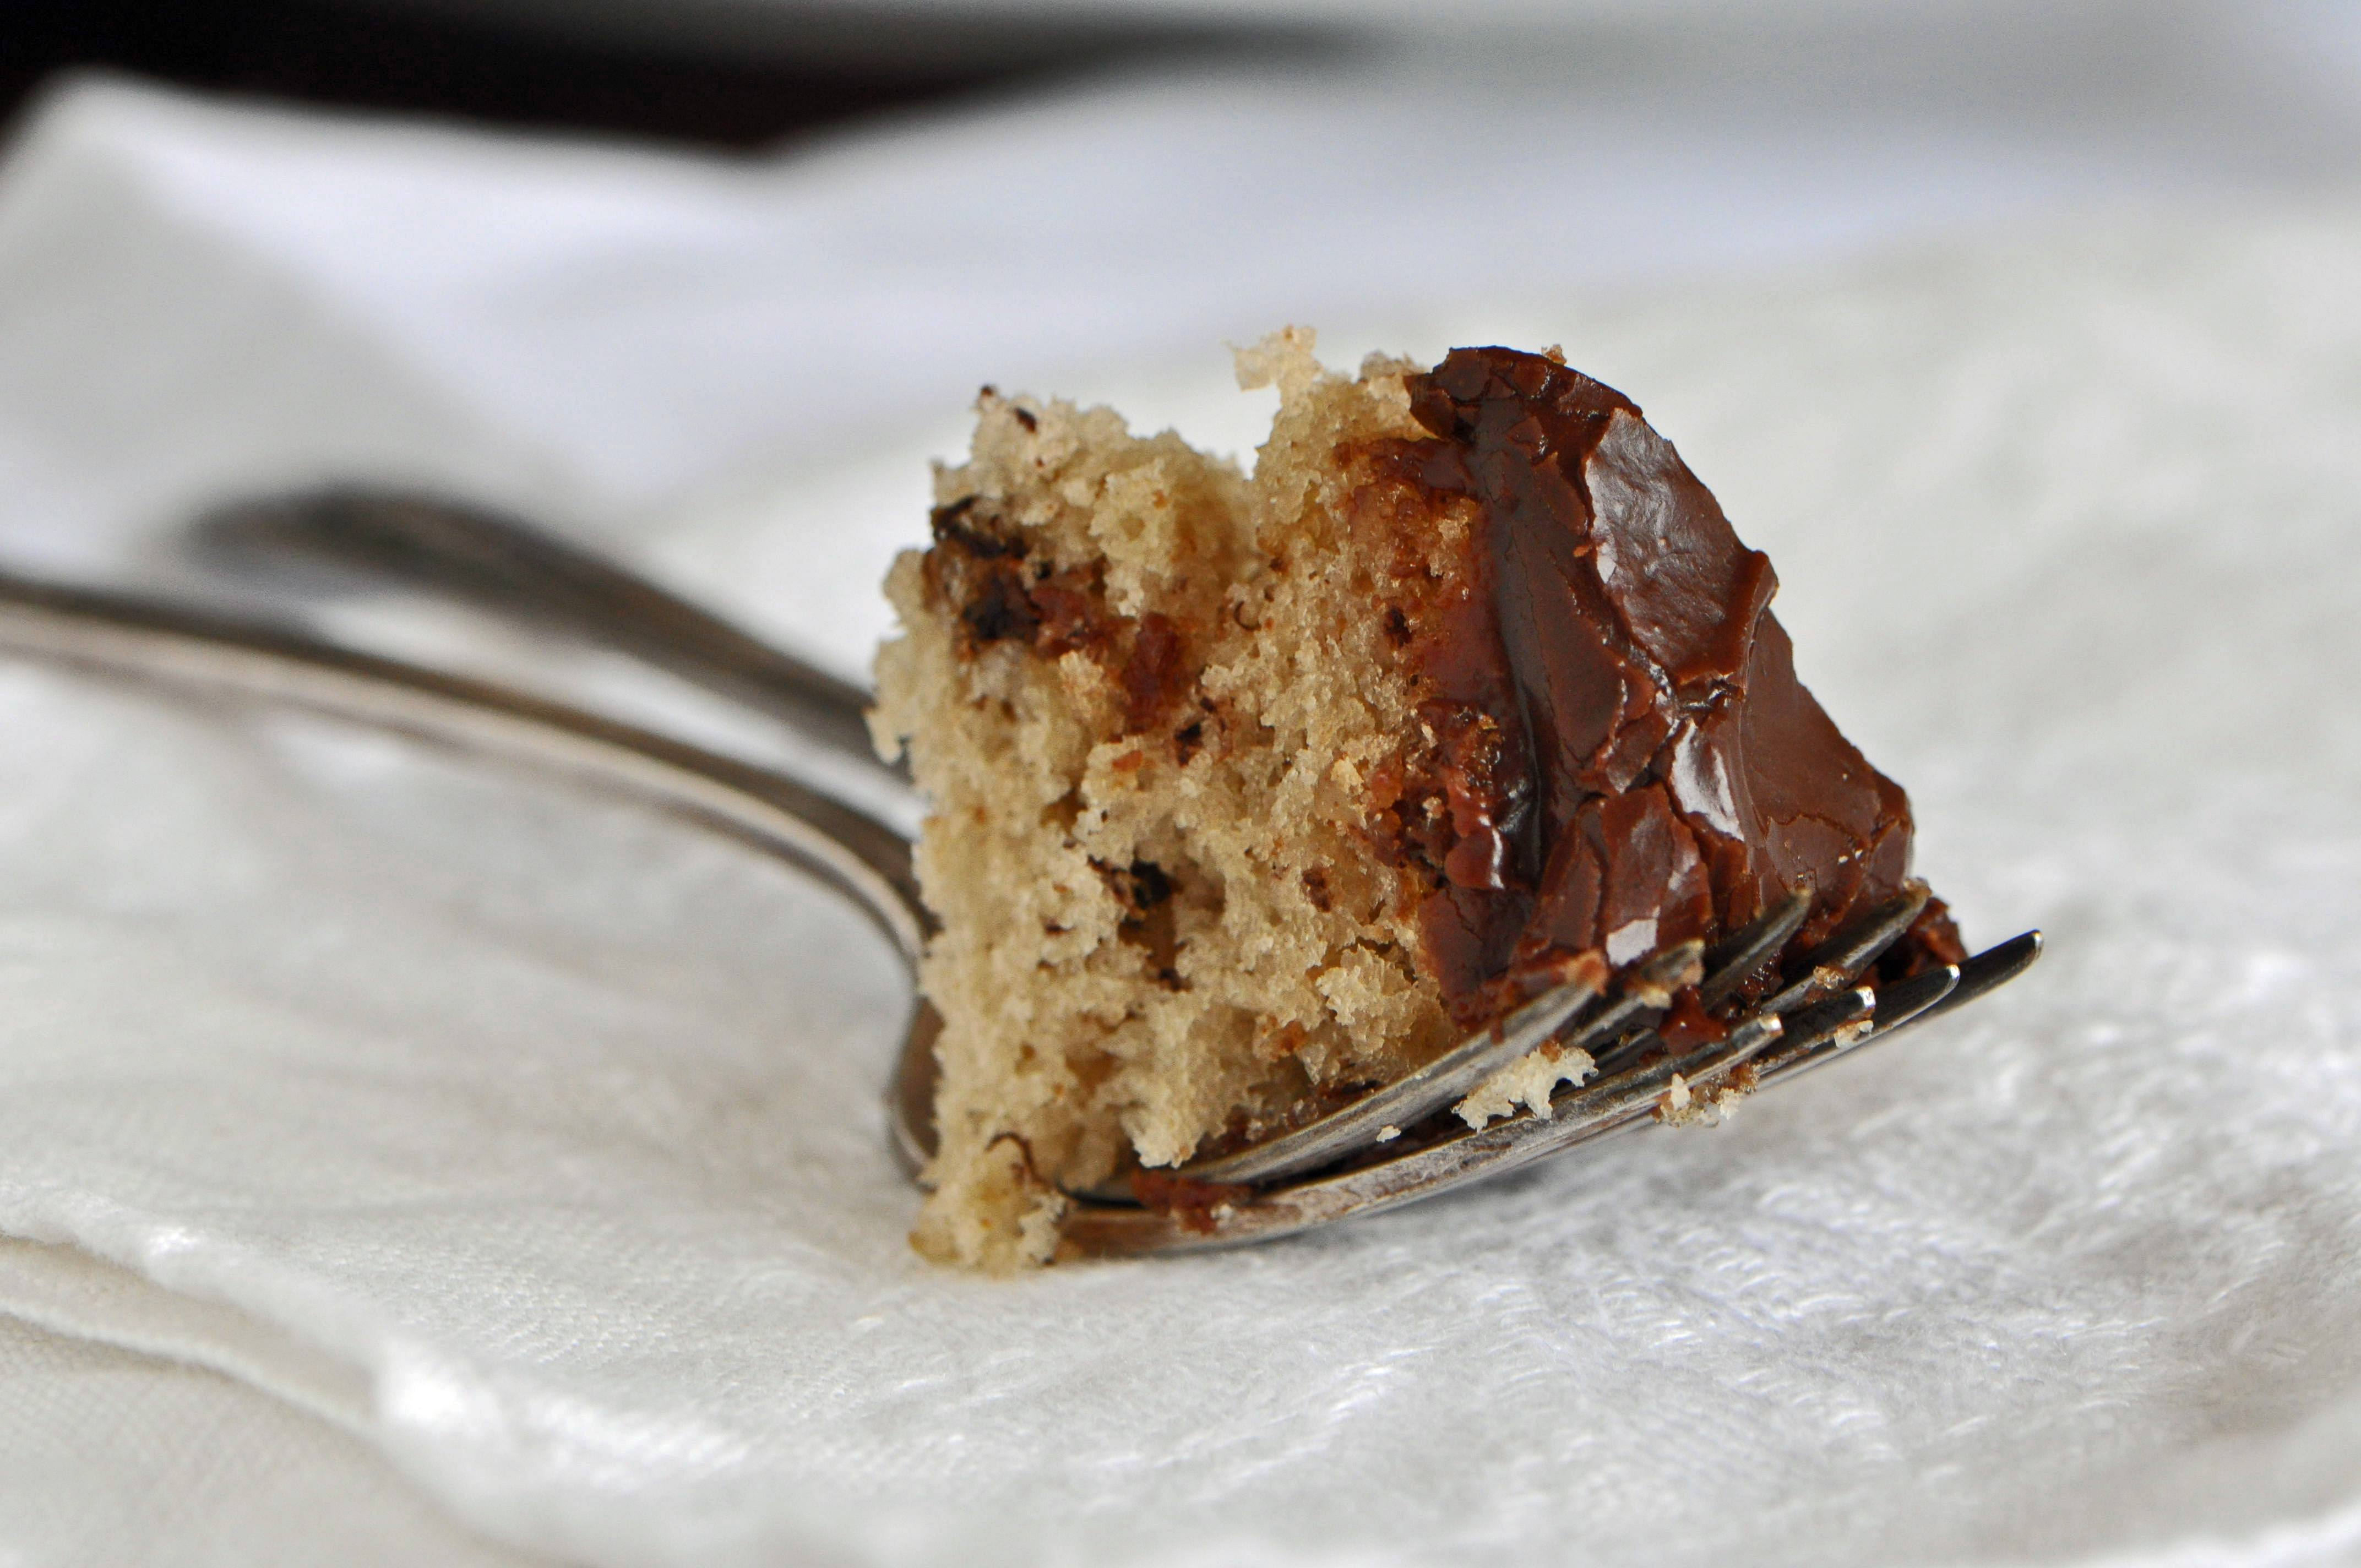 Buttermilk Banana Cake with Coffee-Chocolate Frosting Recipe